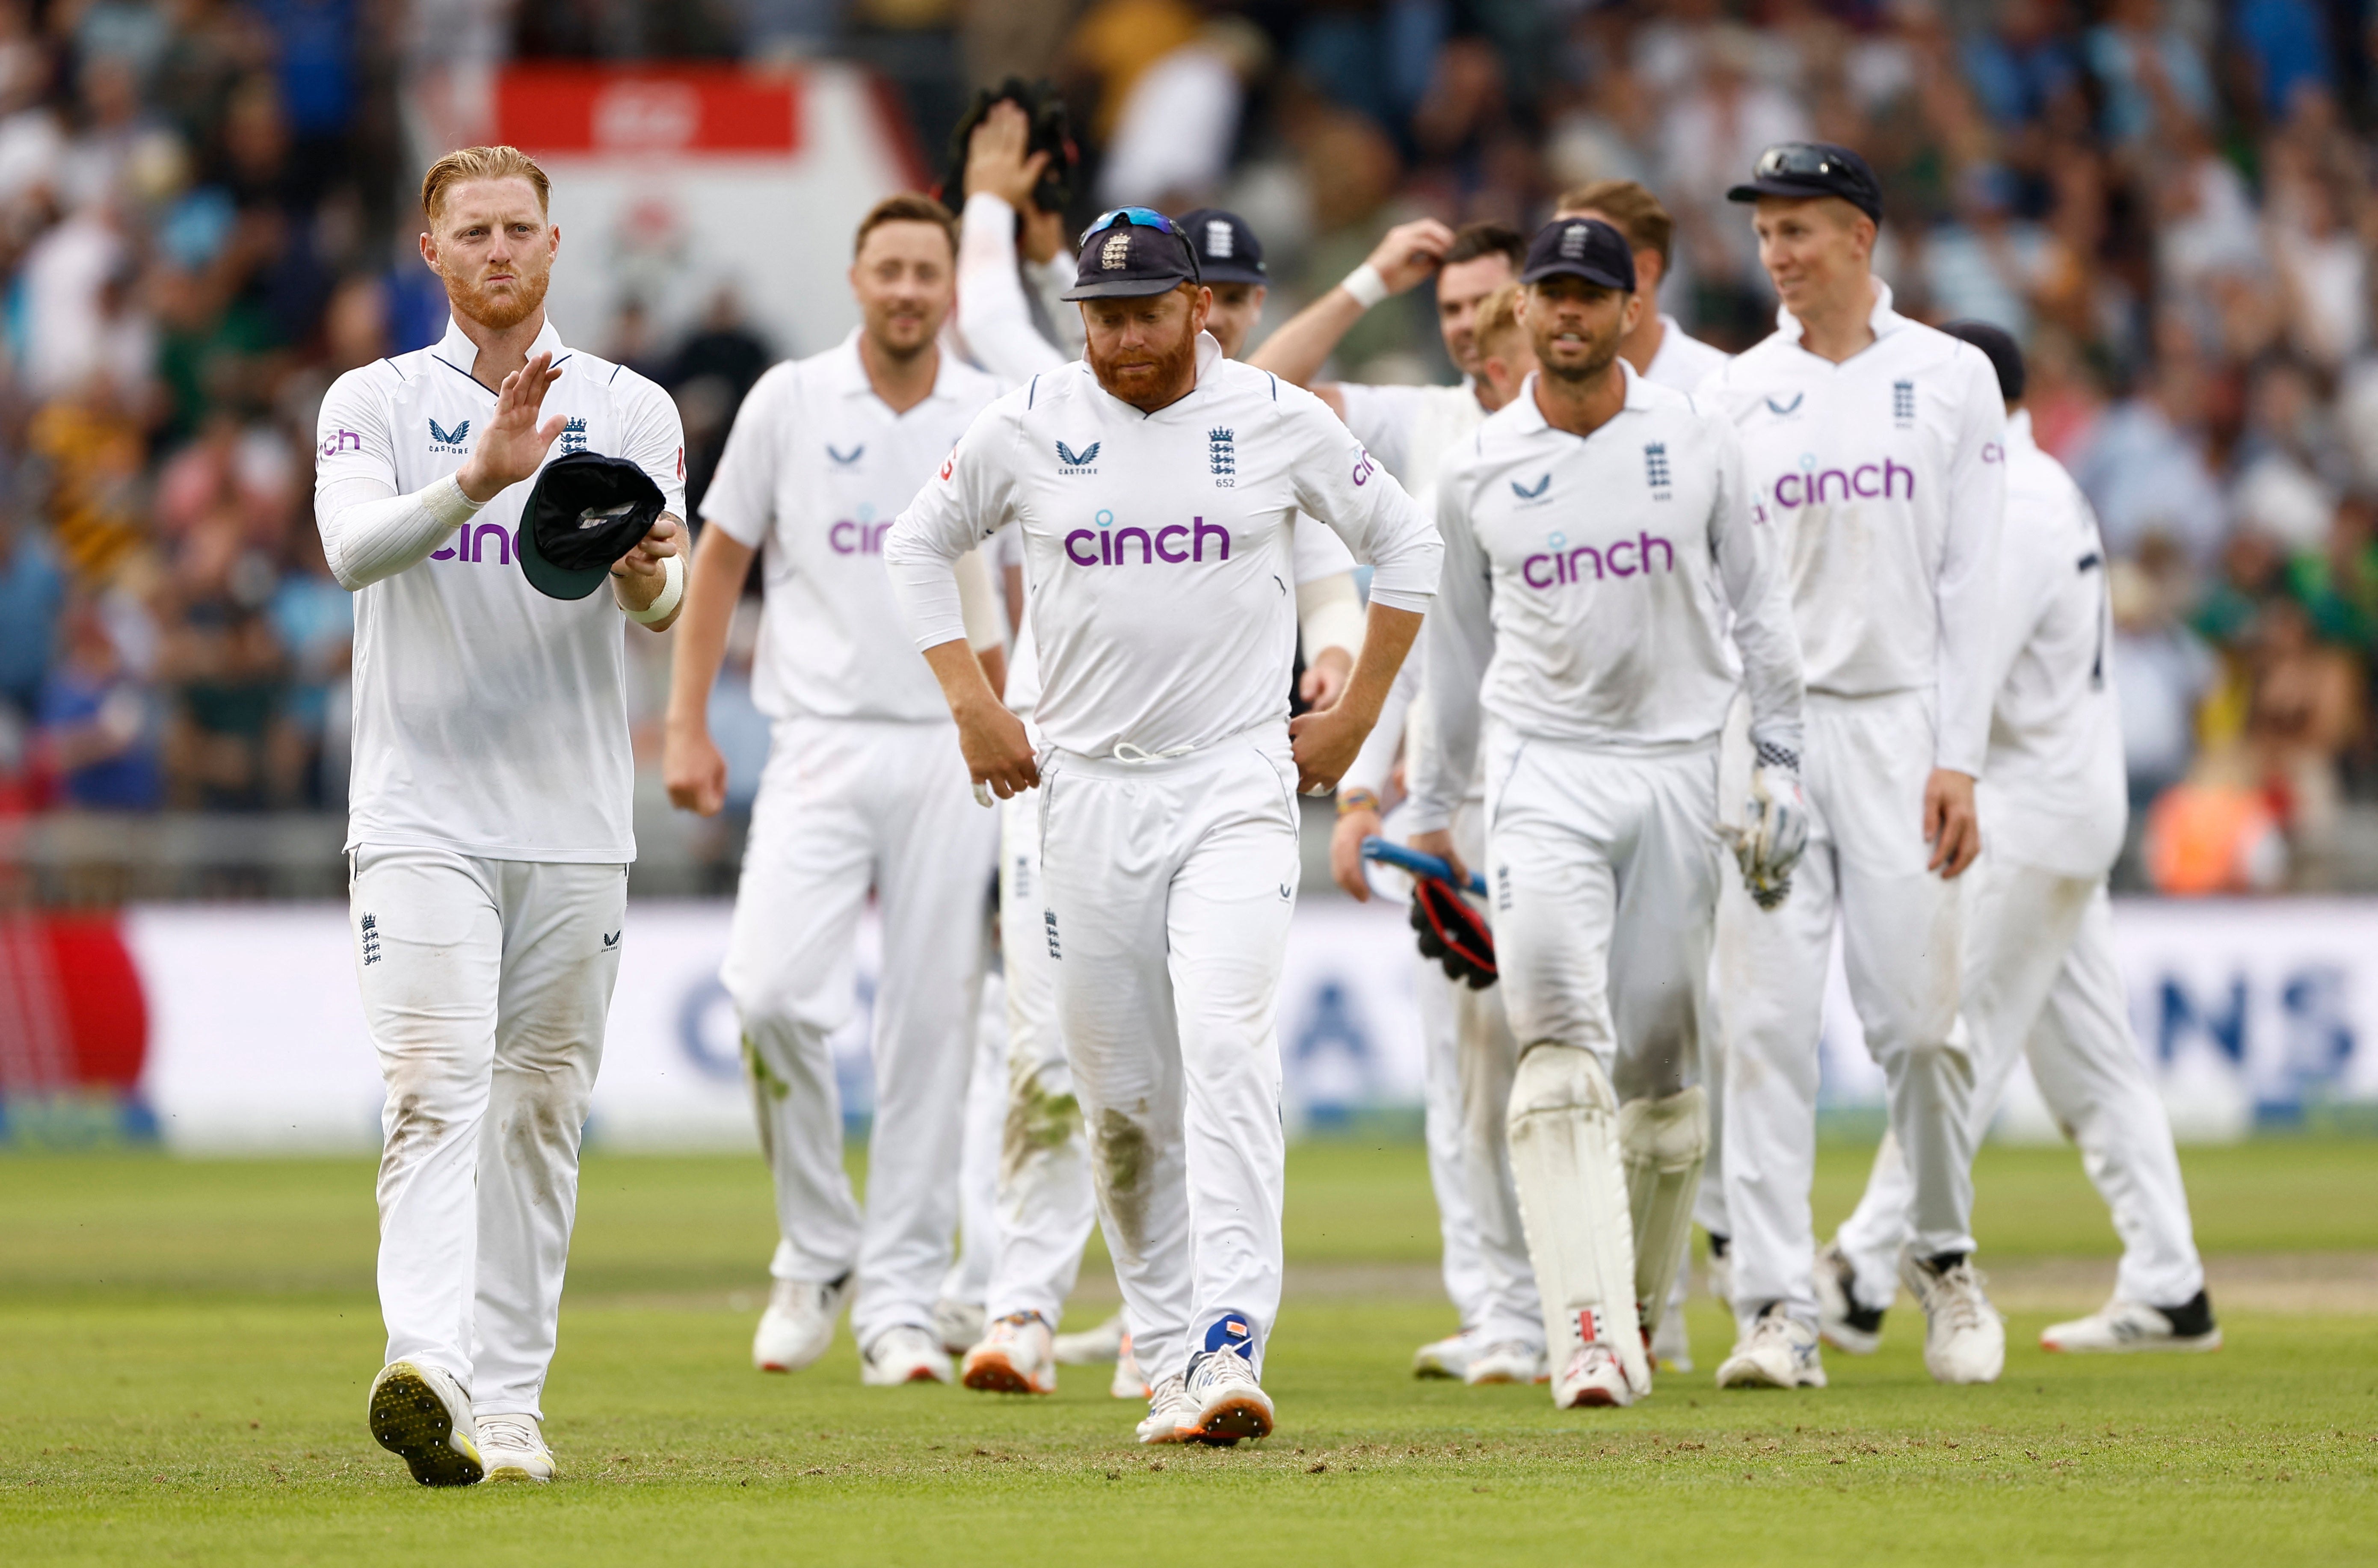 England will pick from an unchanged squad at The Oval